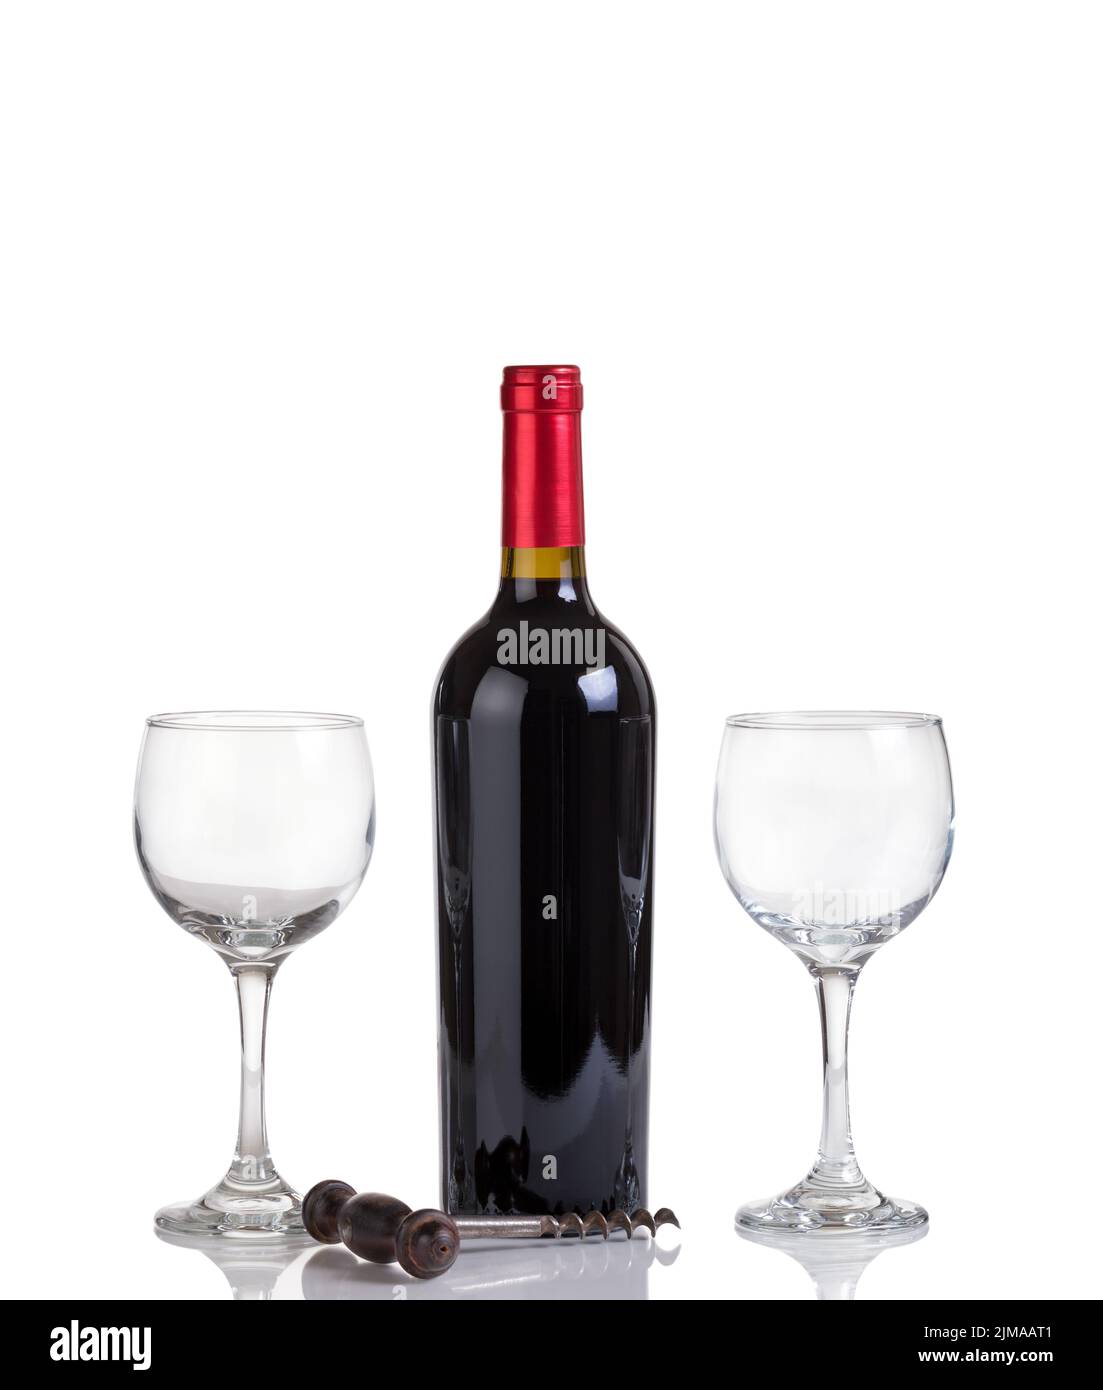 Unopened bottle of red wine and glasses isolated on white background Stock Photo